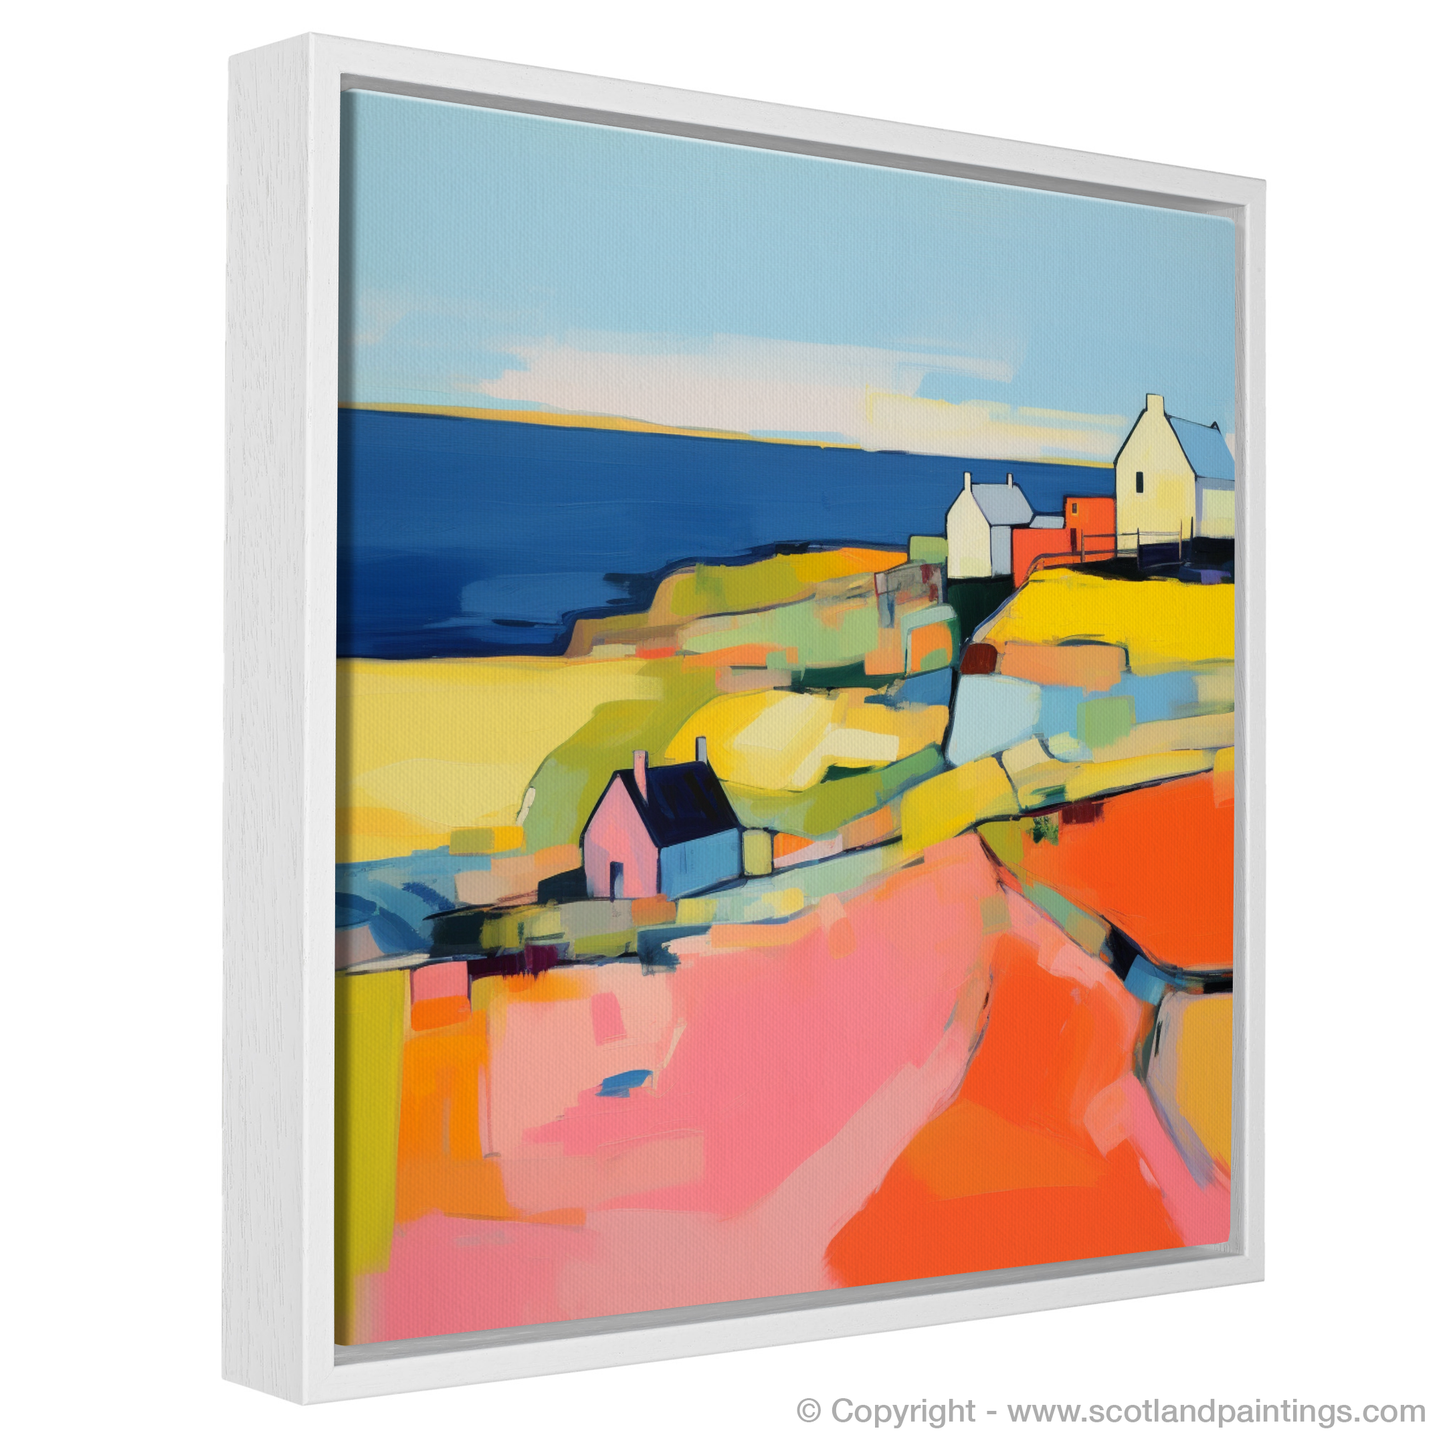 Cullen's Coastal Abstract: A Vibrant Reimagining of Scottish Village Life